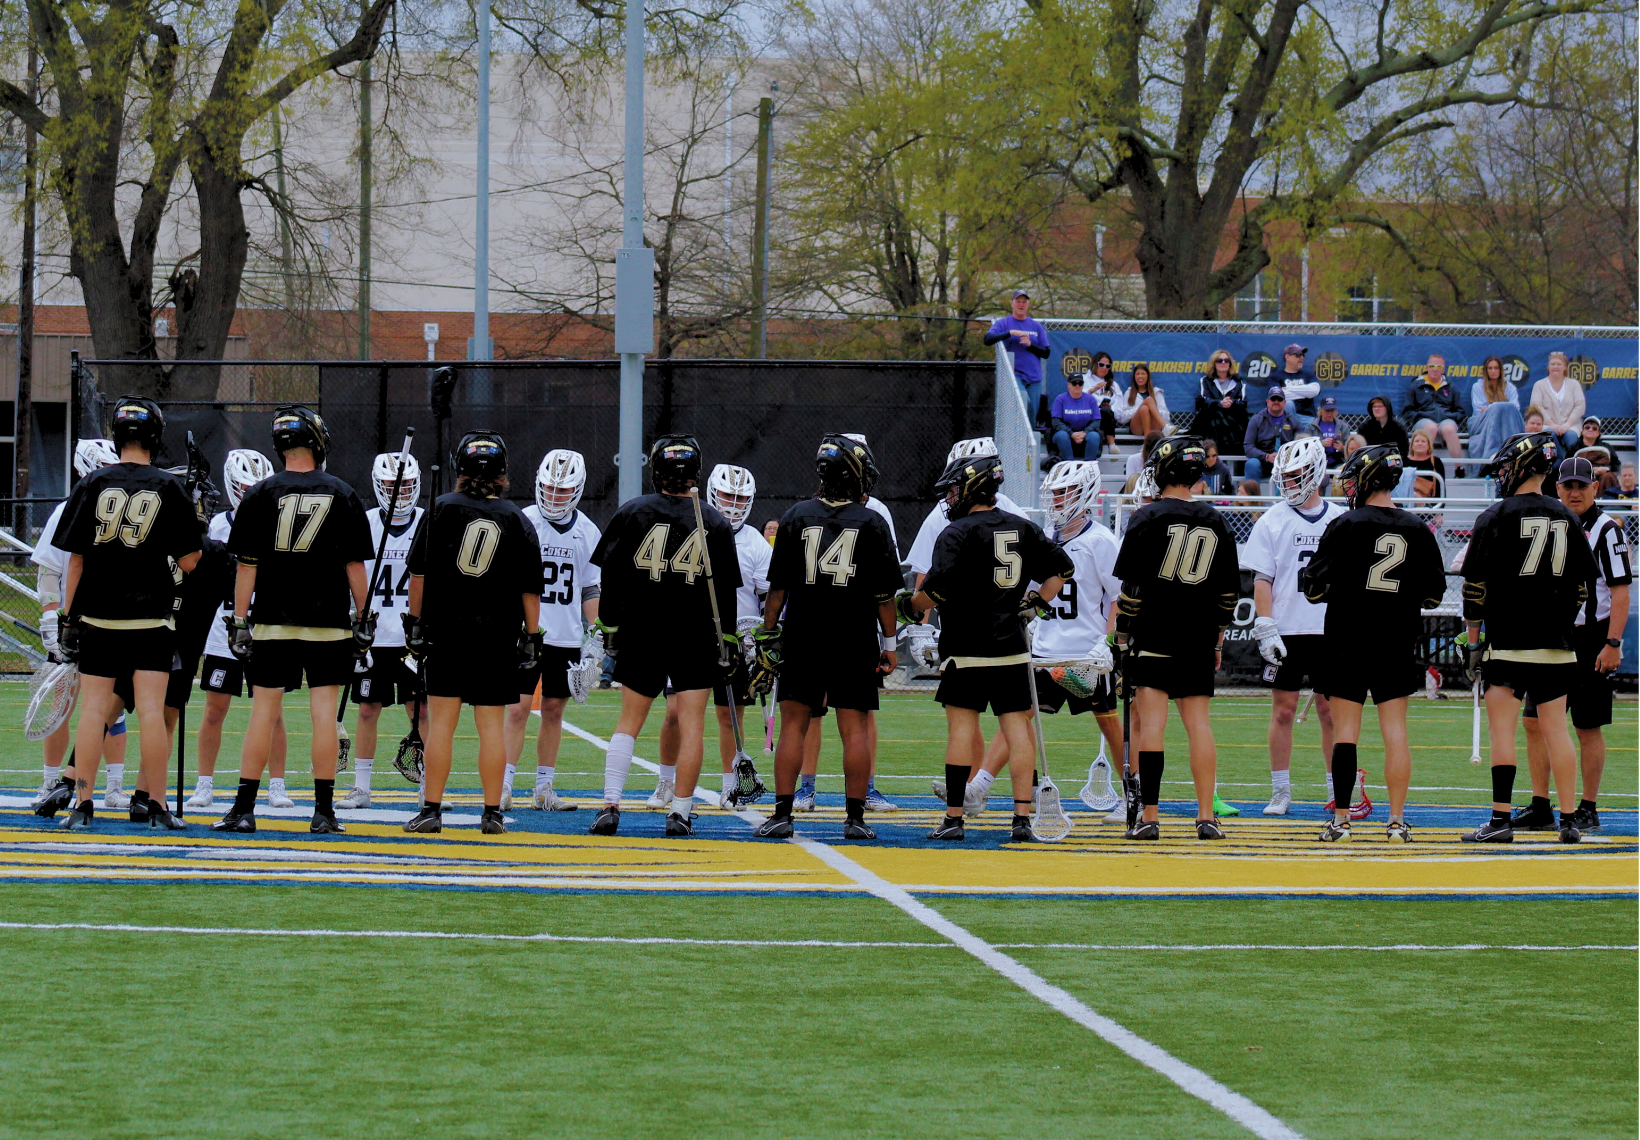 Road Trip to Catawba on Deck for Men’s Lacrosse